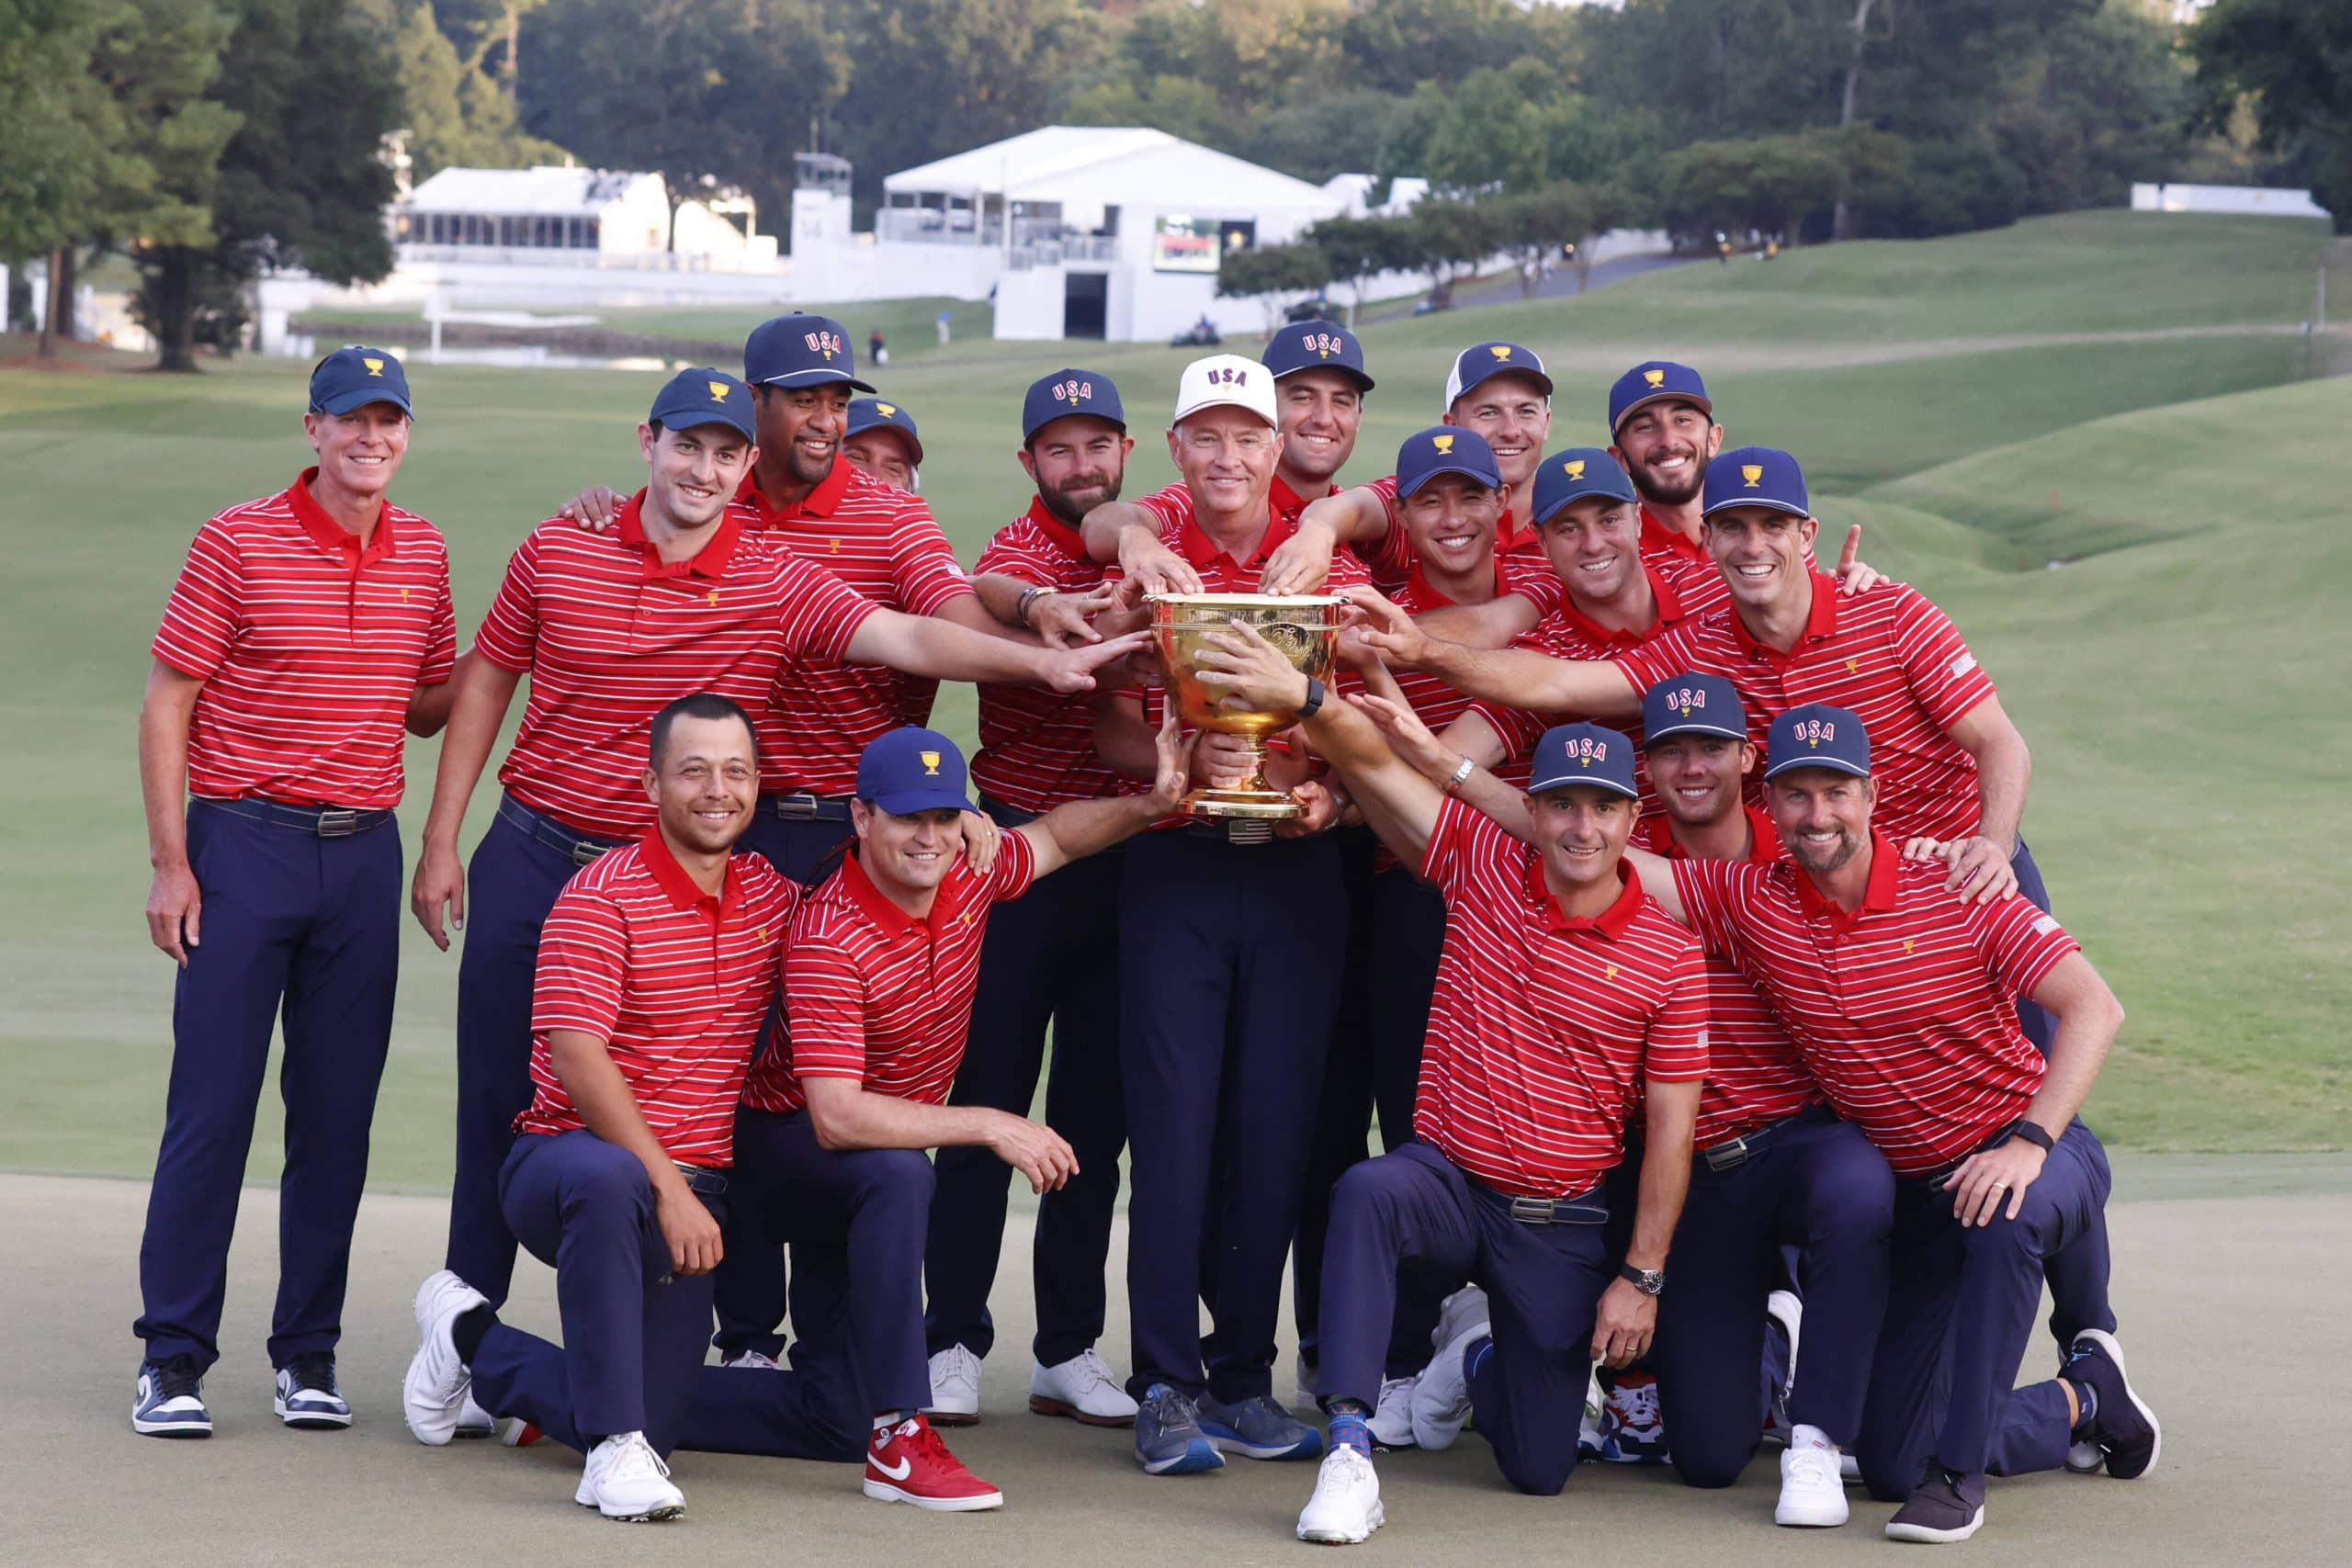 USA Presidents Cup Team does a team photo after winning the 2022 Presidents Cup